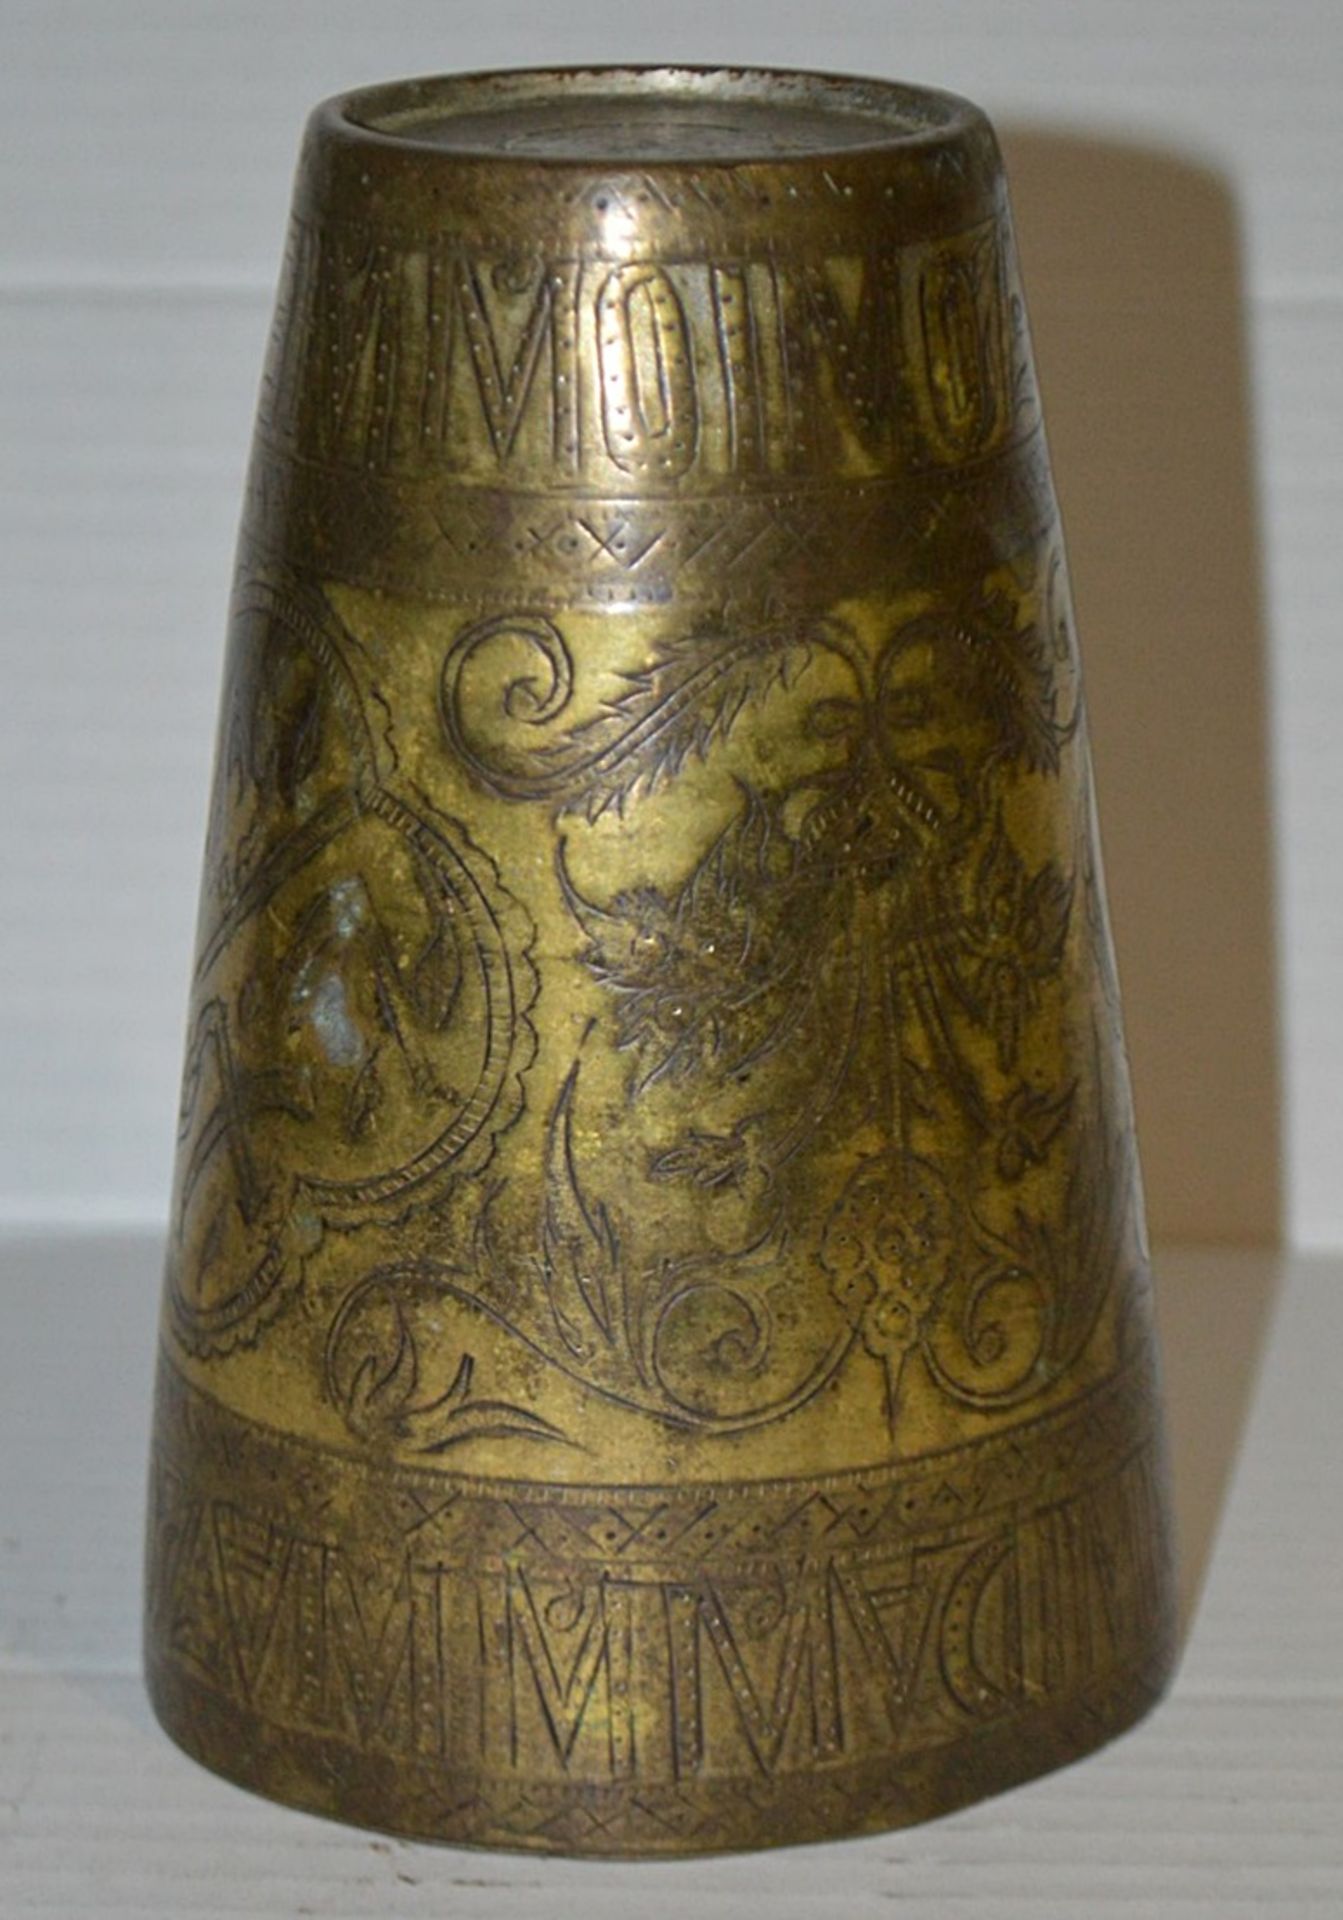 1 x Persian Gilded Tinner Beaker - Decorated With Floral Design And Scripture - Height: 14.5cm (5. - Image 5 of 6